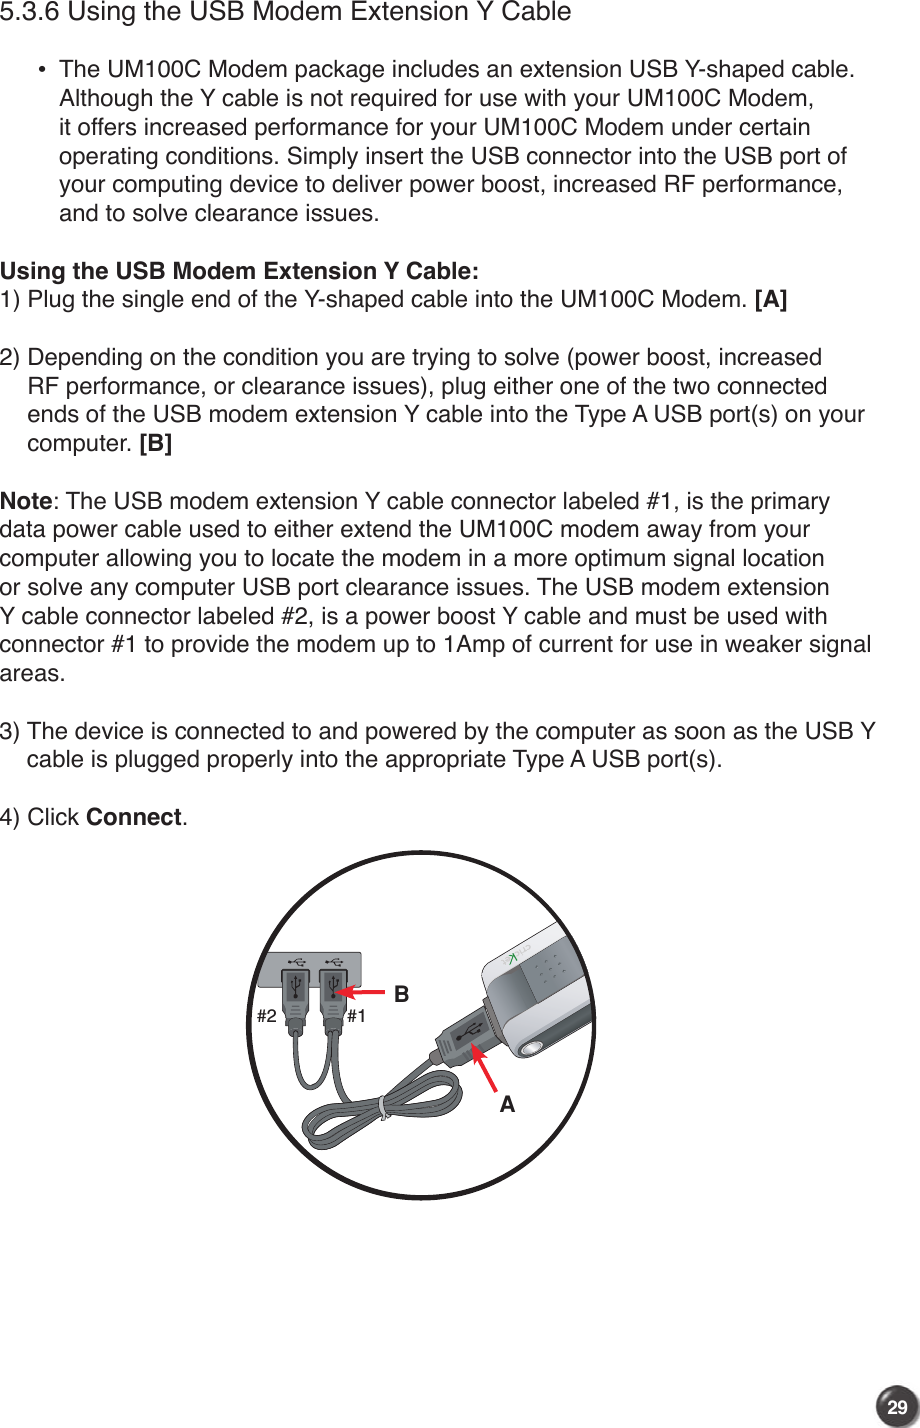 29285.3.6 Using the USB Modem Extension Y Cable  •    The UM100C Modem package includes an extension USB Y-shaped cable. Although the Y cable is not required for use with your UM100C Modem, it offers increased performance for your UM100C Modem under certain operating conditions. Simply insert the USB connector into the USB port of your computing device to deliver power boost, increased RF performance, and to solve clearance issues.Using the USB Modem Extension Y Cable:1) Plug the single end of the Y-shaped cable into the UM100C Modem. [A]2)  Depending on the condition you are trying to solve (power boost, increased RF performance, or clearance issues), plug either one of the two connected ends of the USB modem extension Y cable into the Type A USB port(s) on your computer. [B]Note: The USB modem extension Y cable connector labeled #1, is the primary data power cable used to either extend the UM100C modem away from your computer allowing you to locate the modem in a more optimum signal location or solve any computer USB port clearance issues. The USB modem extension Y cable connector labeled #2, is a power boost Y cable and must be used with connector #1 to provide the modem up to 1Amp of current for use in weaker signal areas.3)  The device is connected to and powered by the computer as soon as the USB Y cable is plugged properly into the appropriate Type A USB port(s).4)  Click Connect.AB#1#2